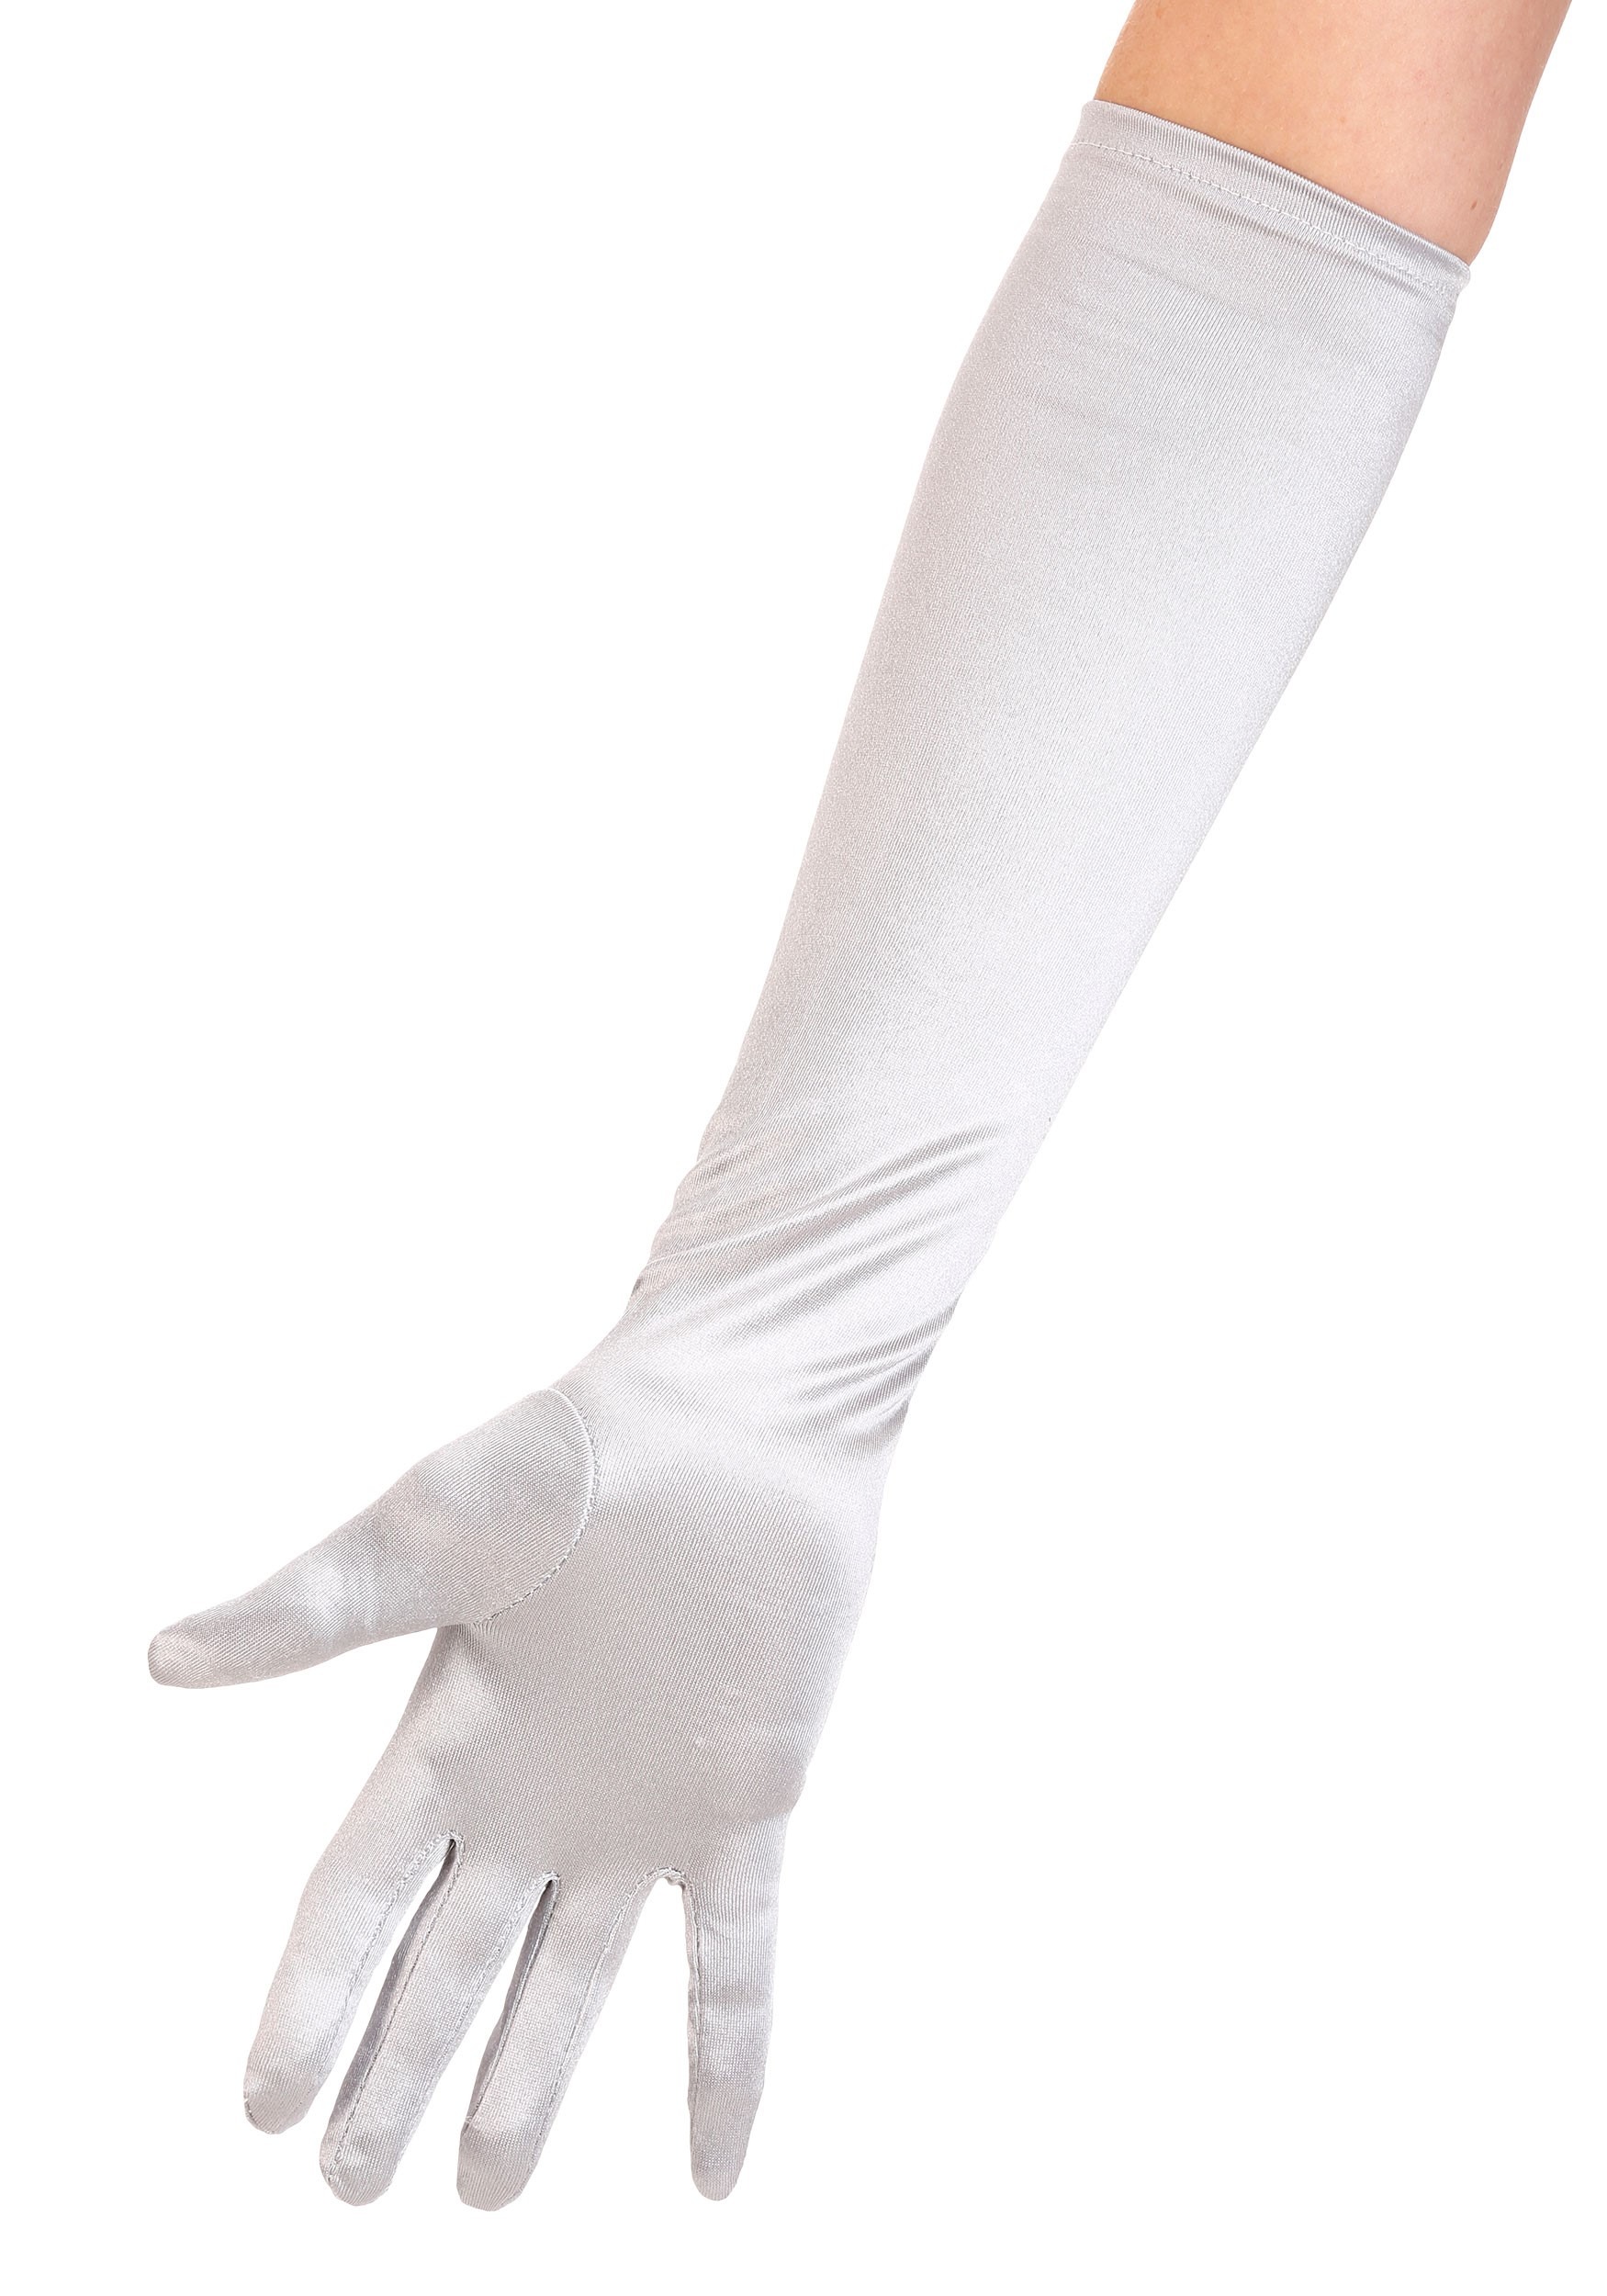 Silver Forearm Womens Gloves